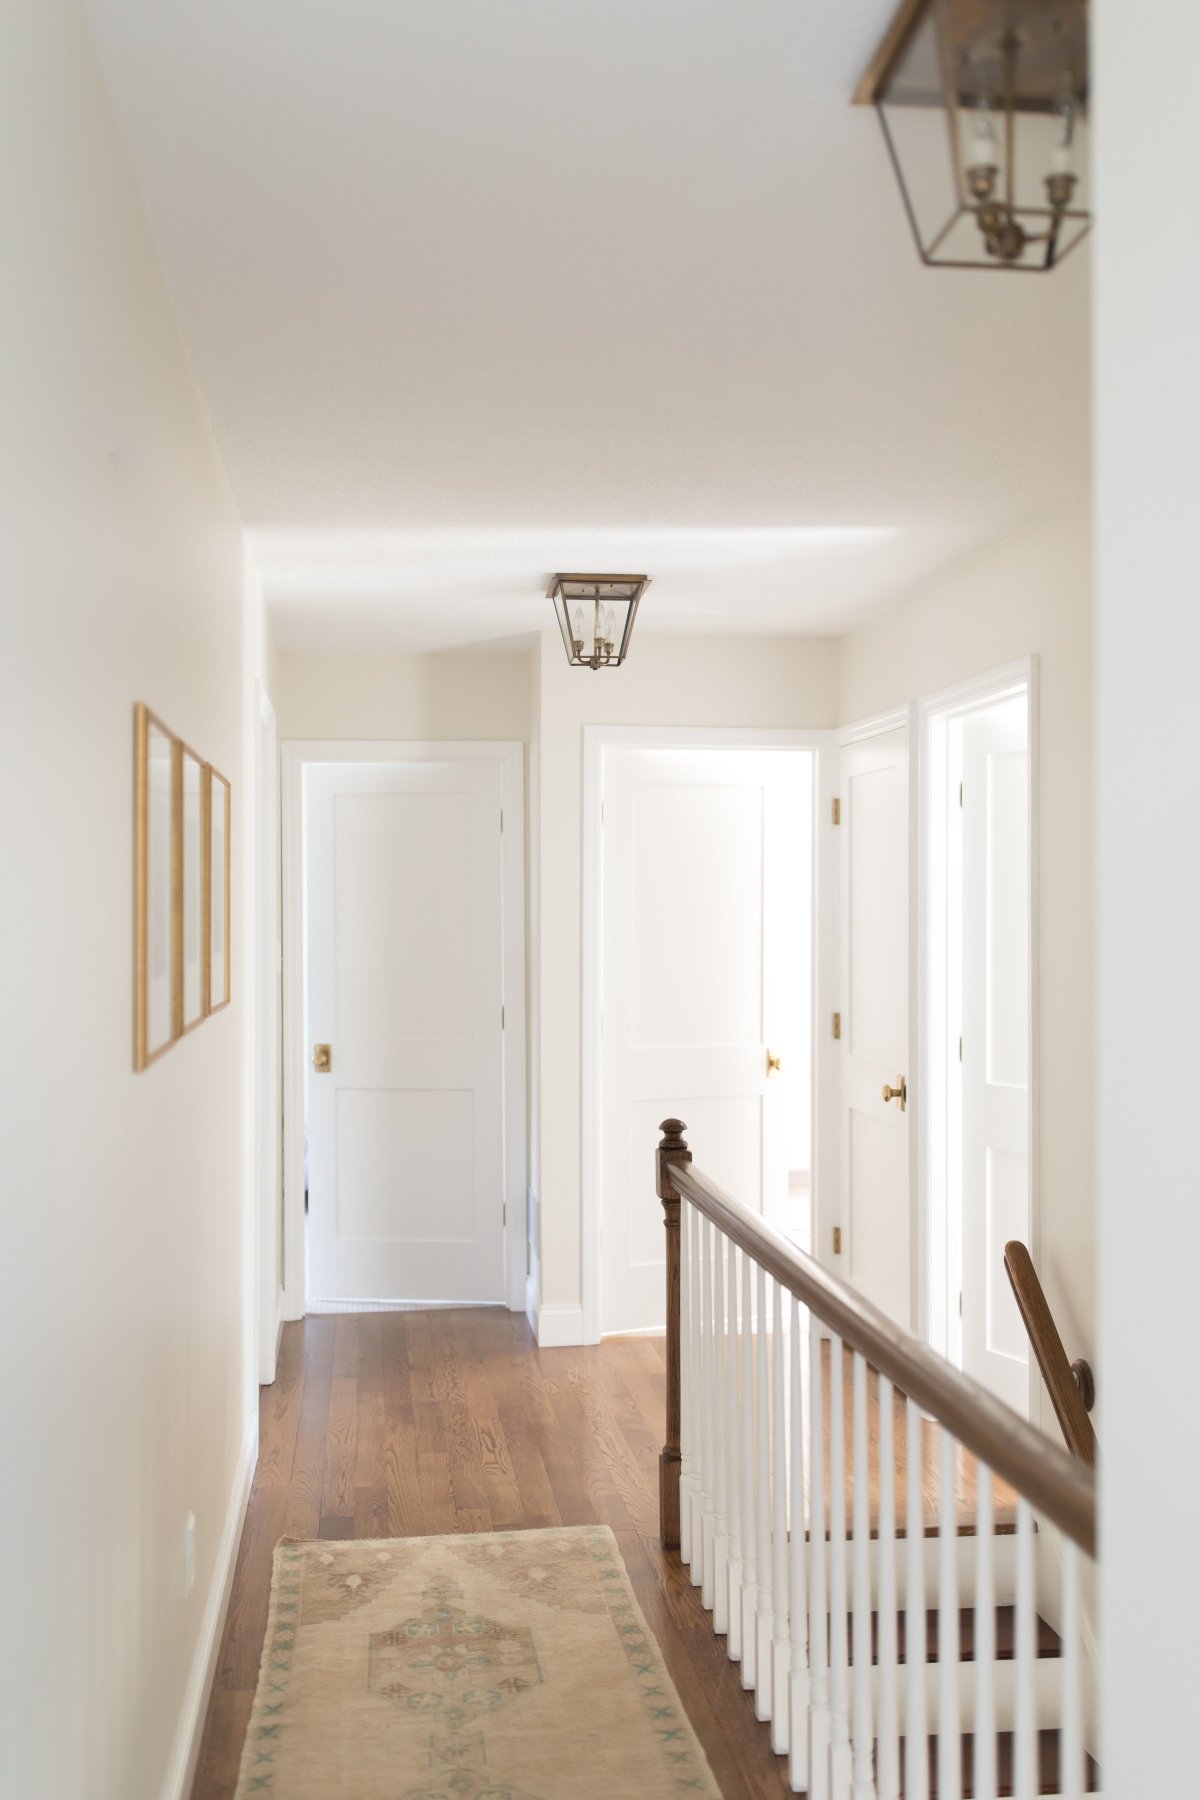 A white hallway in the upstairs of a home with wood floors.